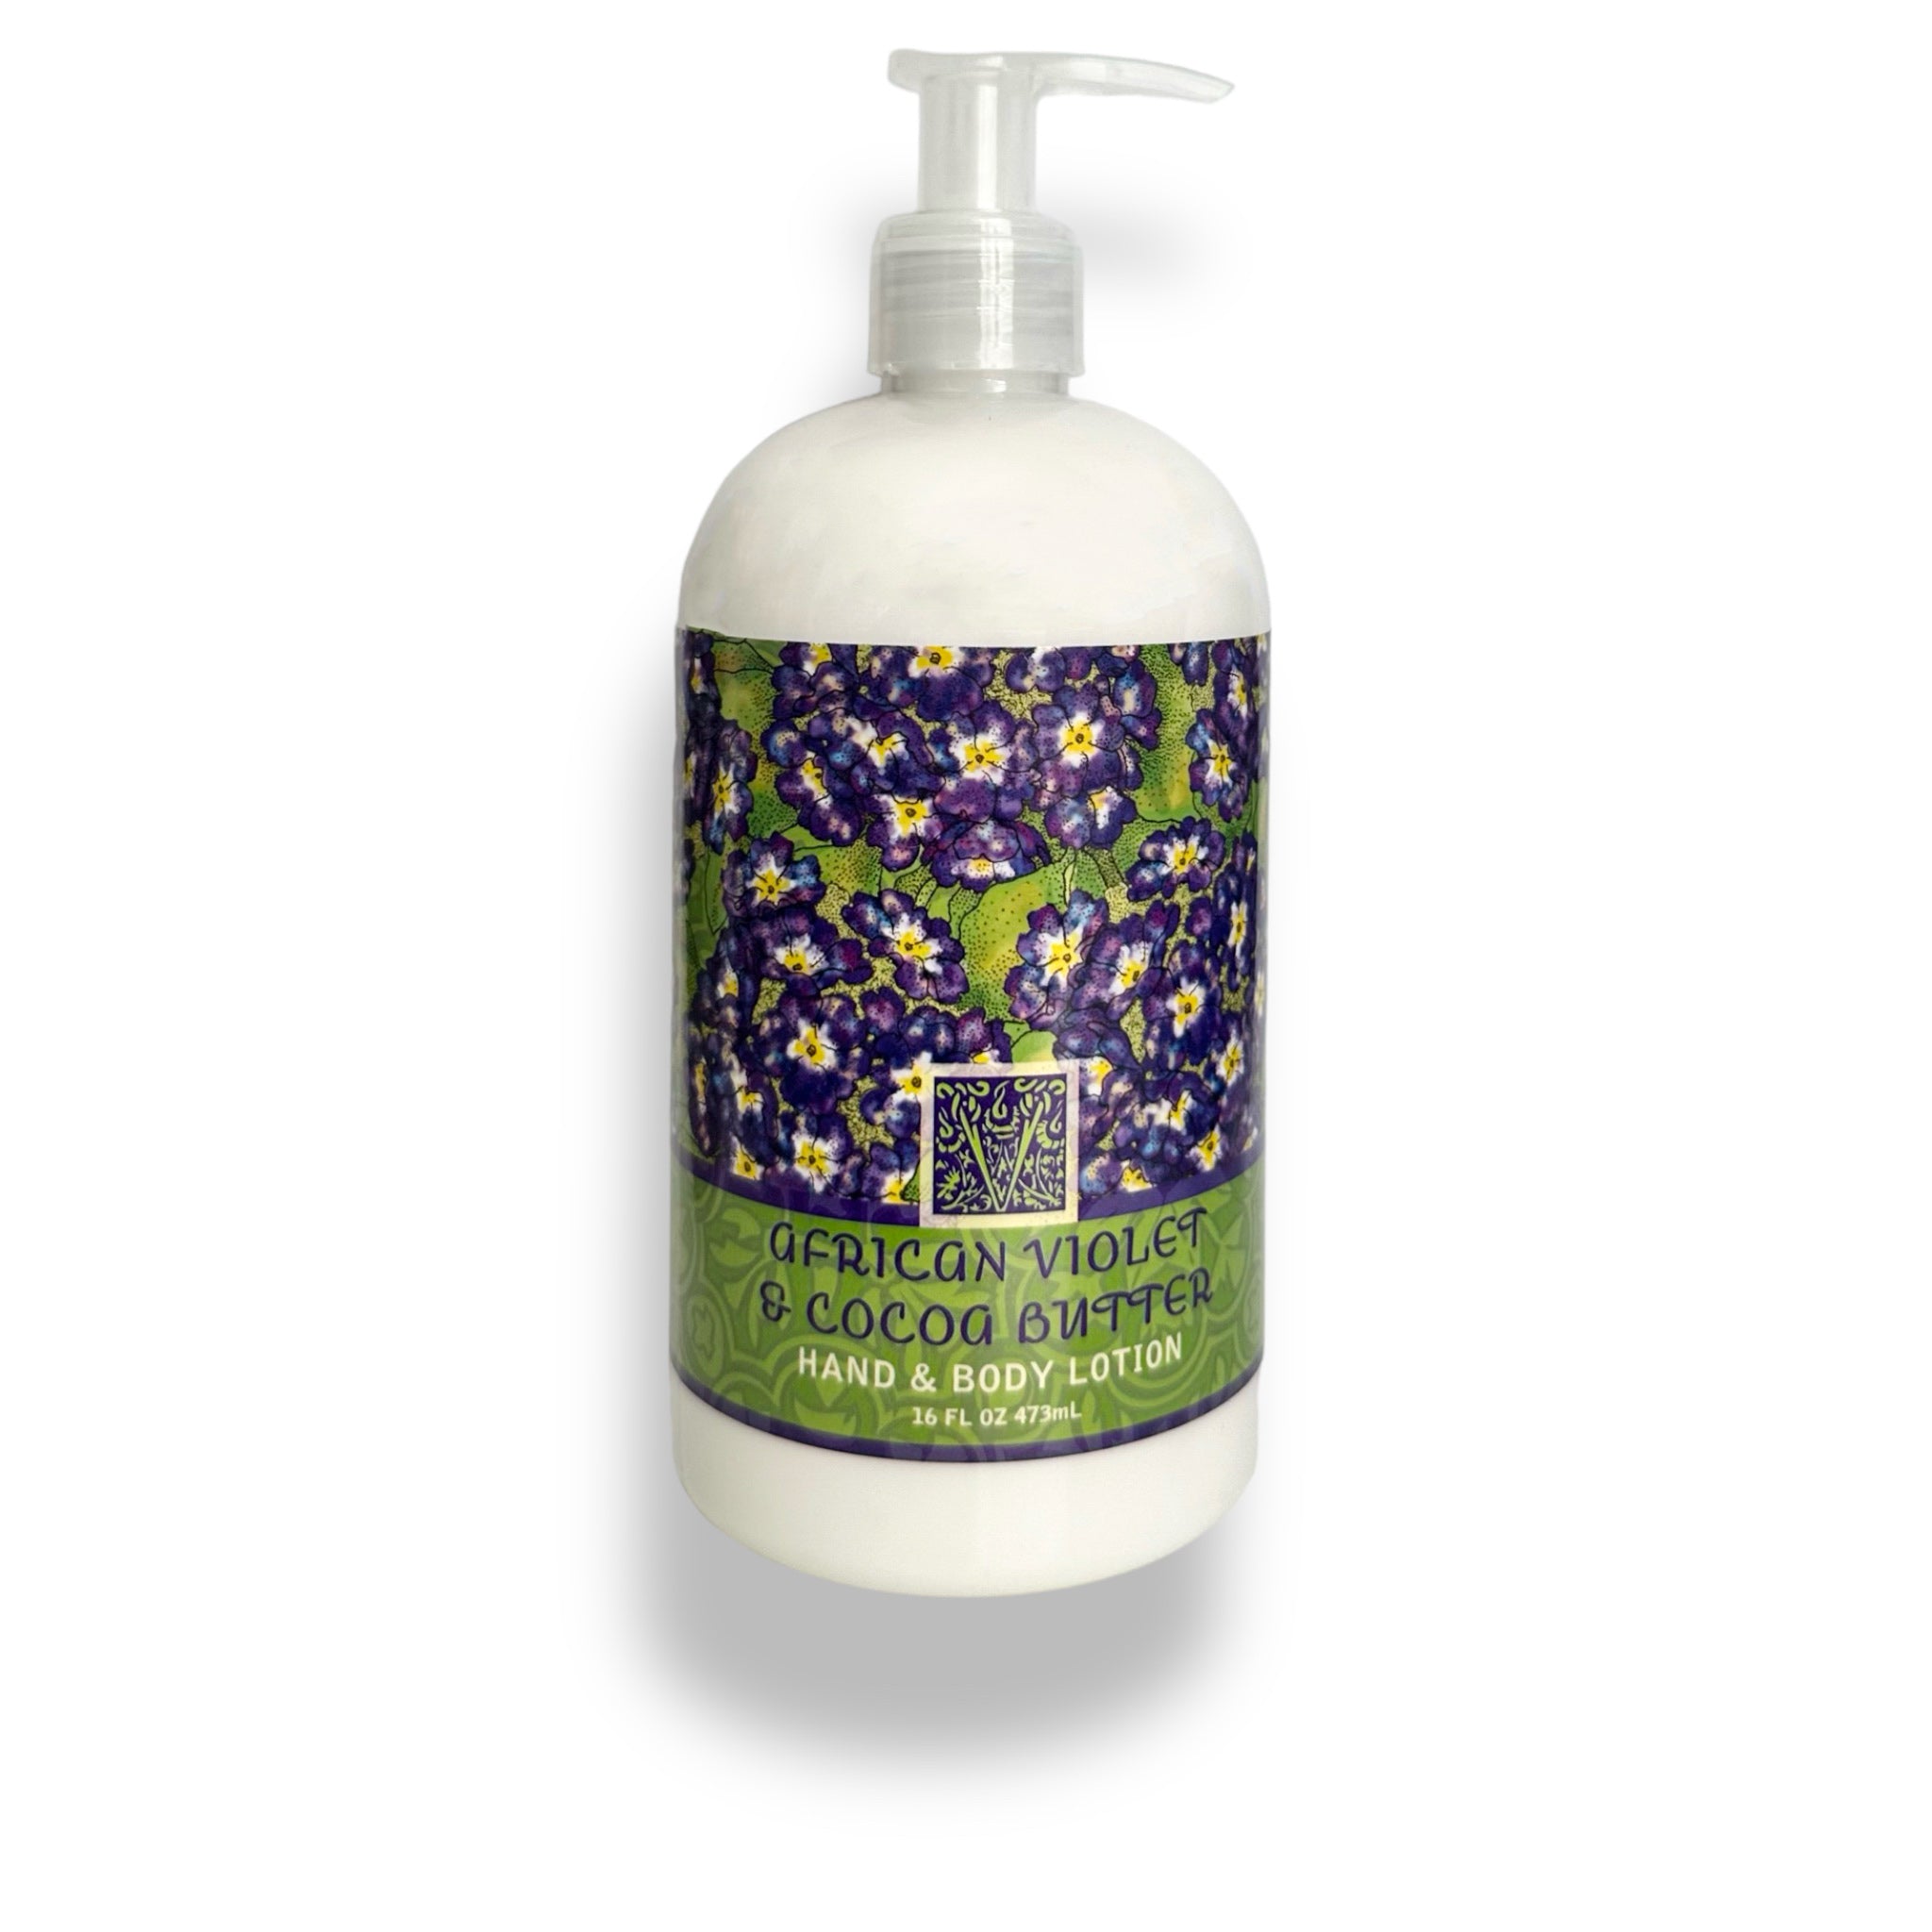 AFRICAN VIOLET Hand and Body Lotion Greenwich Bay Trading Company 